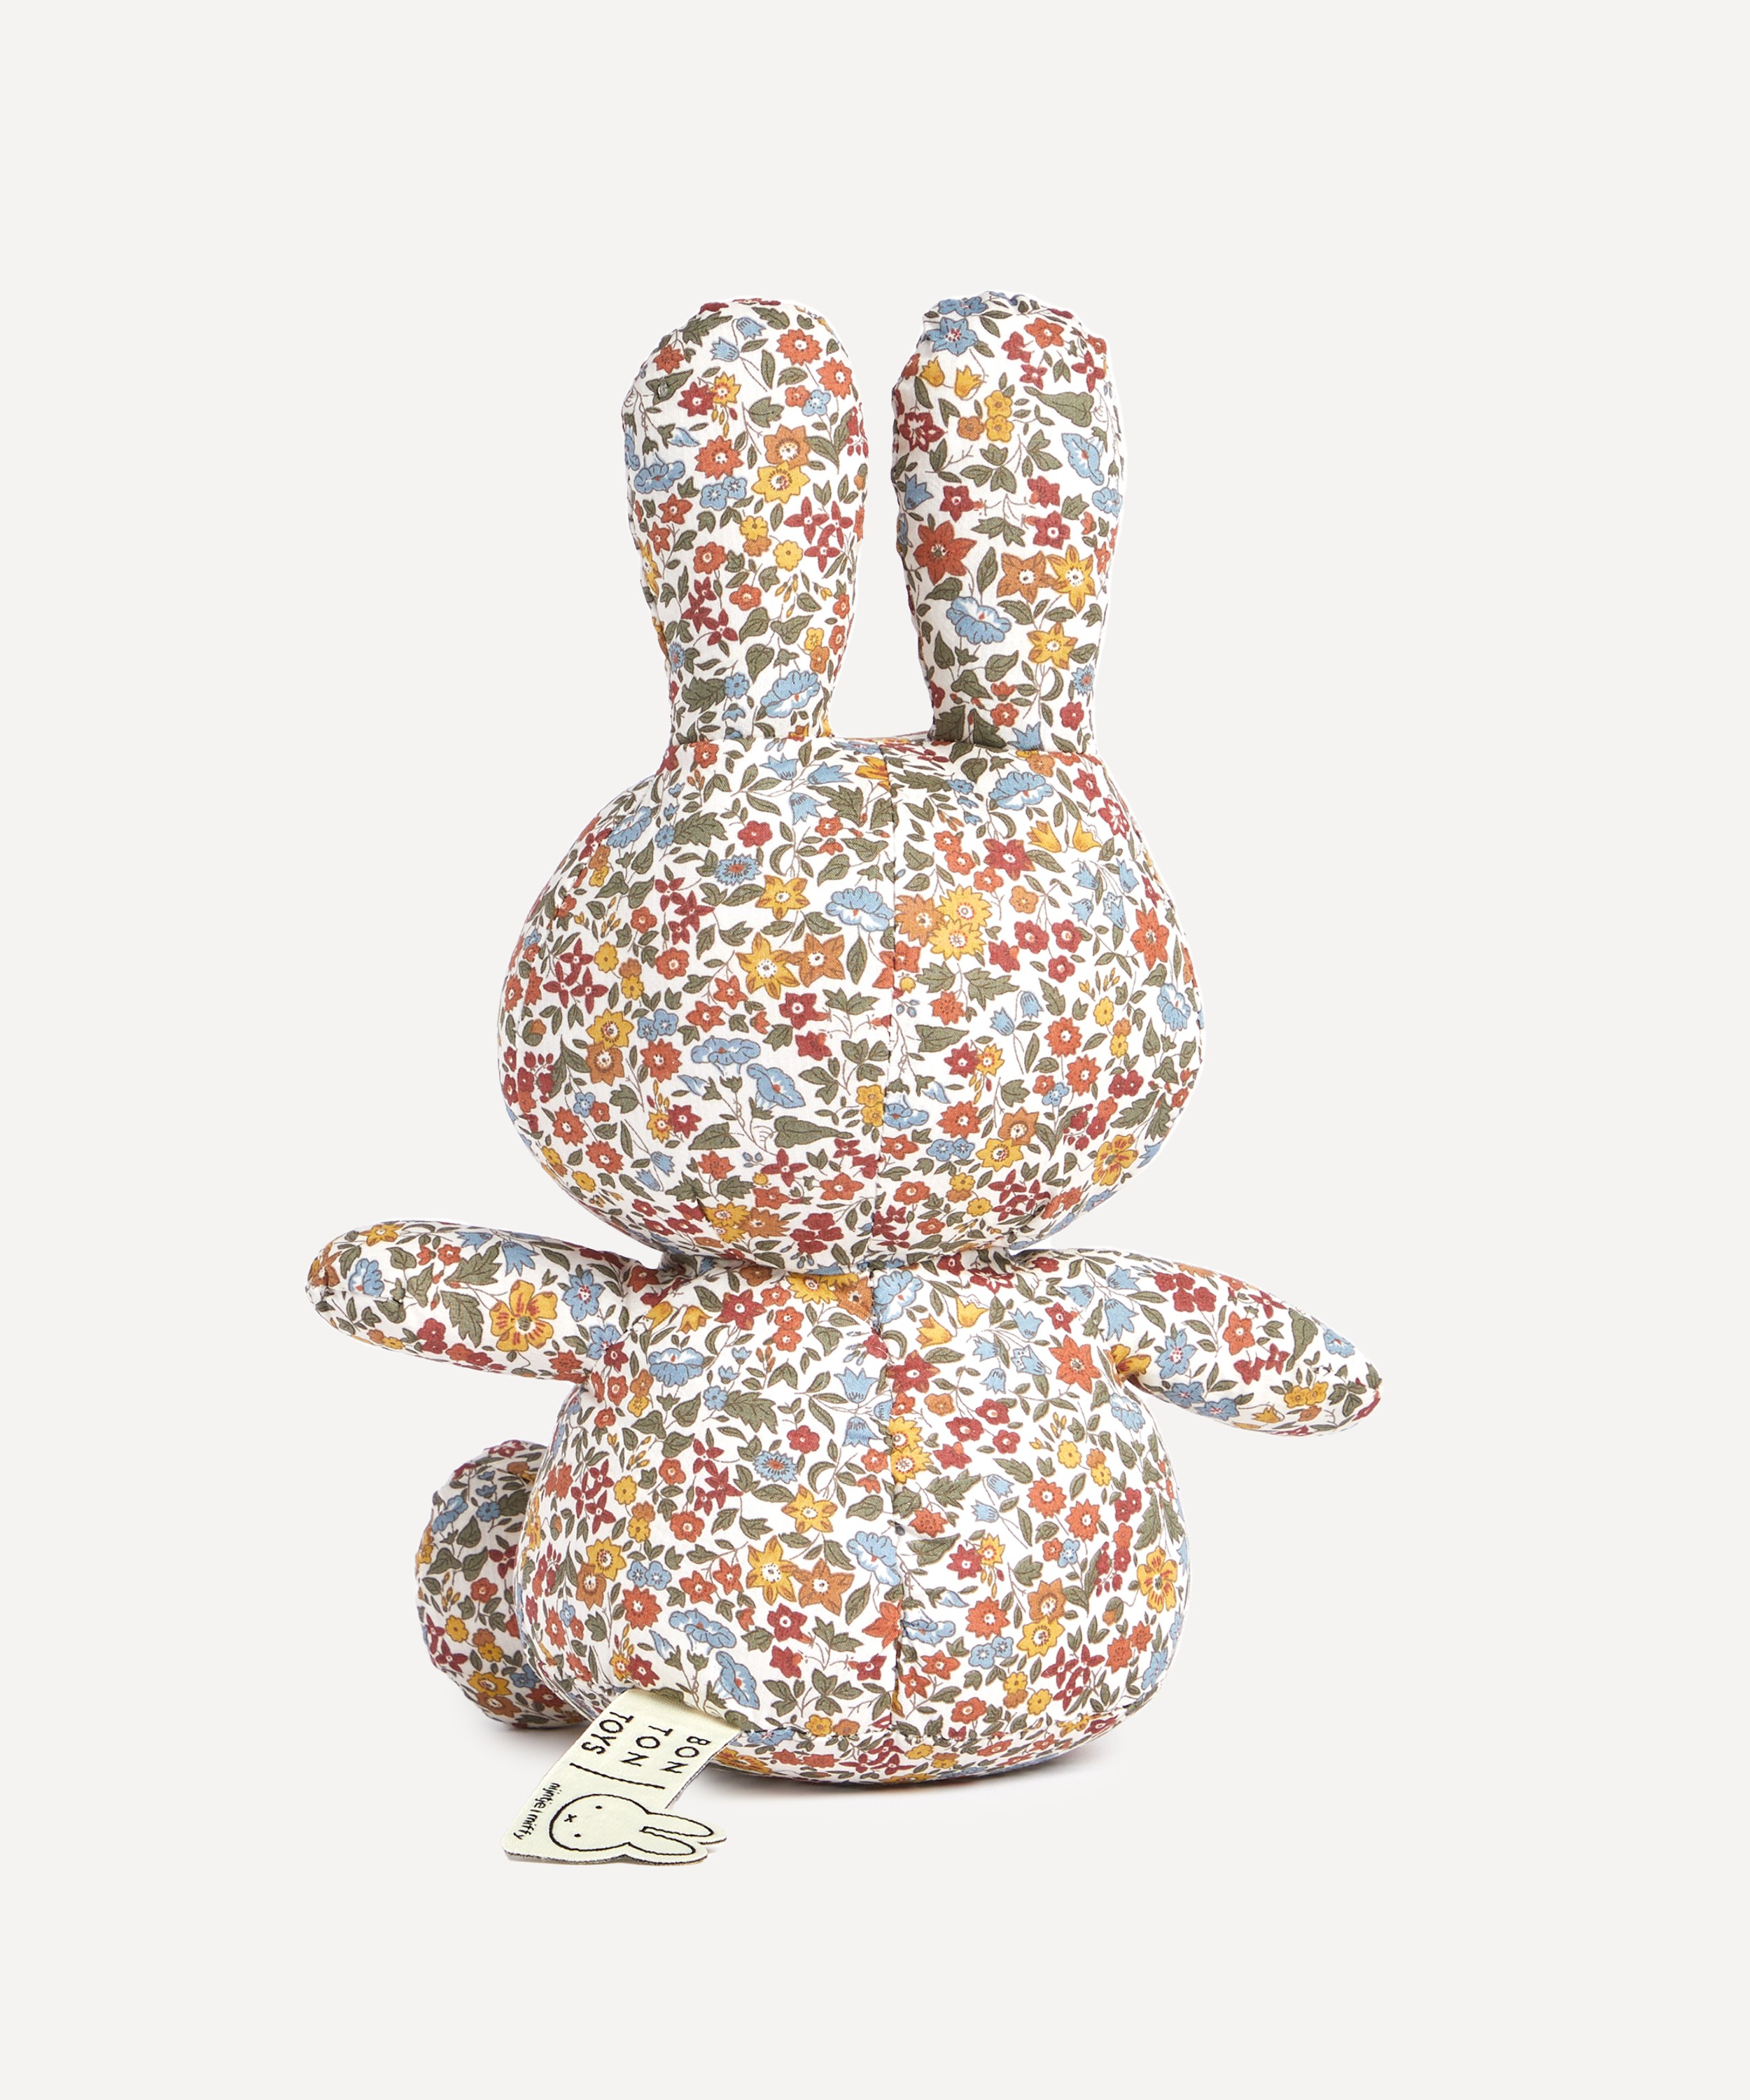 Miffy - Ava Print Miffy Soft Toy image number 1